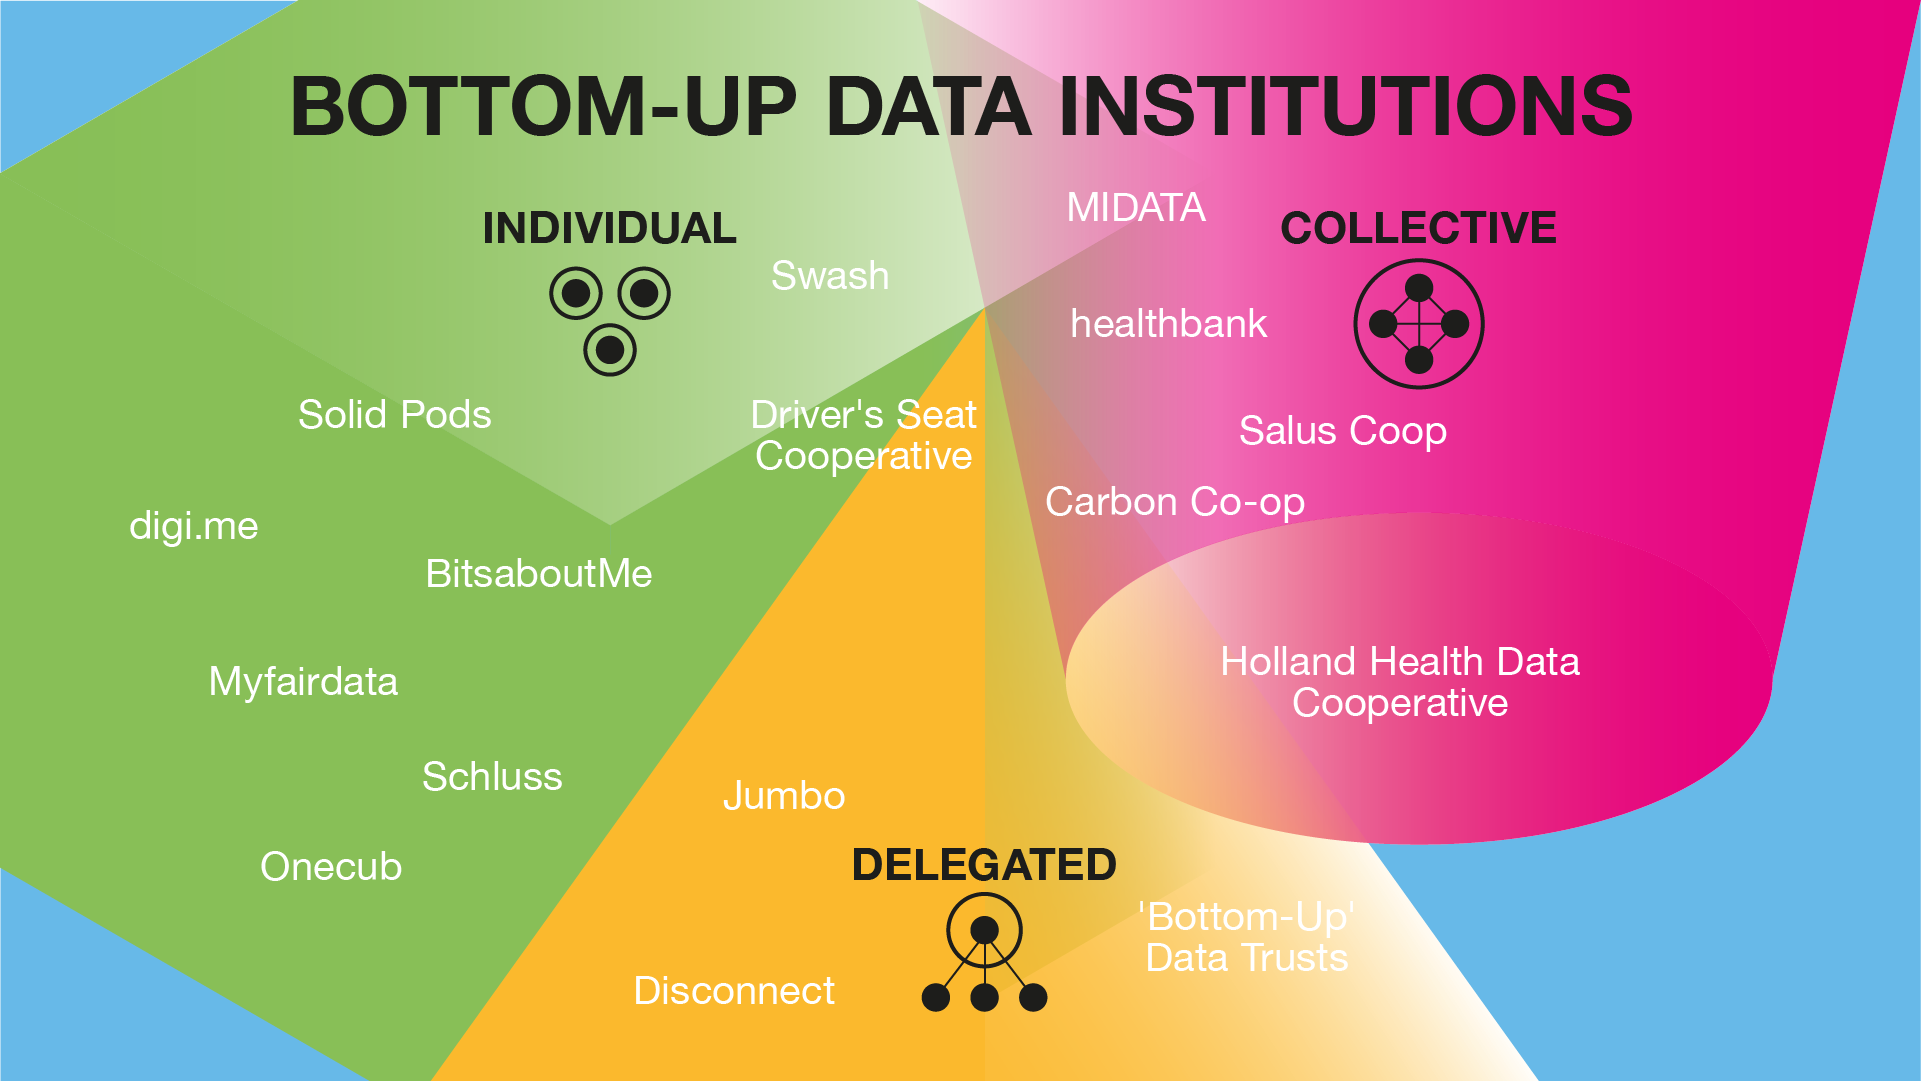 Diagram showing 3 categories of bottom-up data institutions: individual, collective and delegated